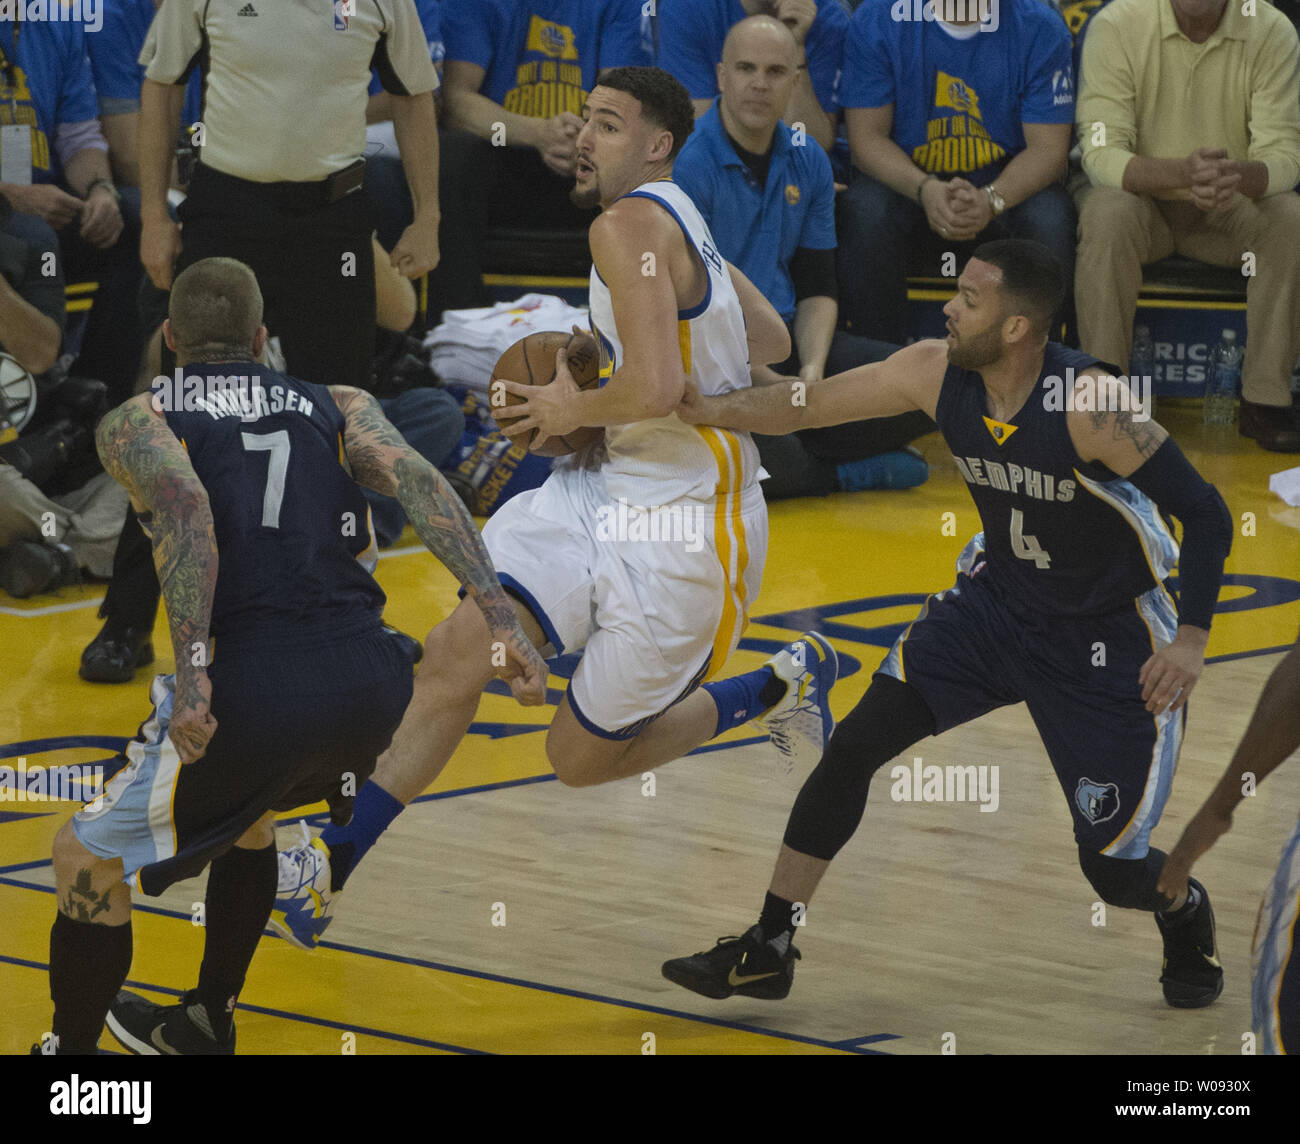 Golden State Warriors Klay Thompson drives to the basket between Memphis Grizzles Chris Anderson (7) and Jordan Farmer (4) in the first period at Oracle Arena in Oakland, California on April 13, 2016. The Warriors defeated the Grizzles to set a season record of 73 wins.    Photo by Terry Schmitt/UPI Stock Photo